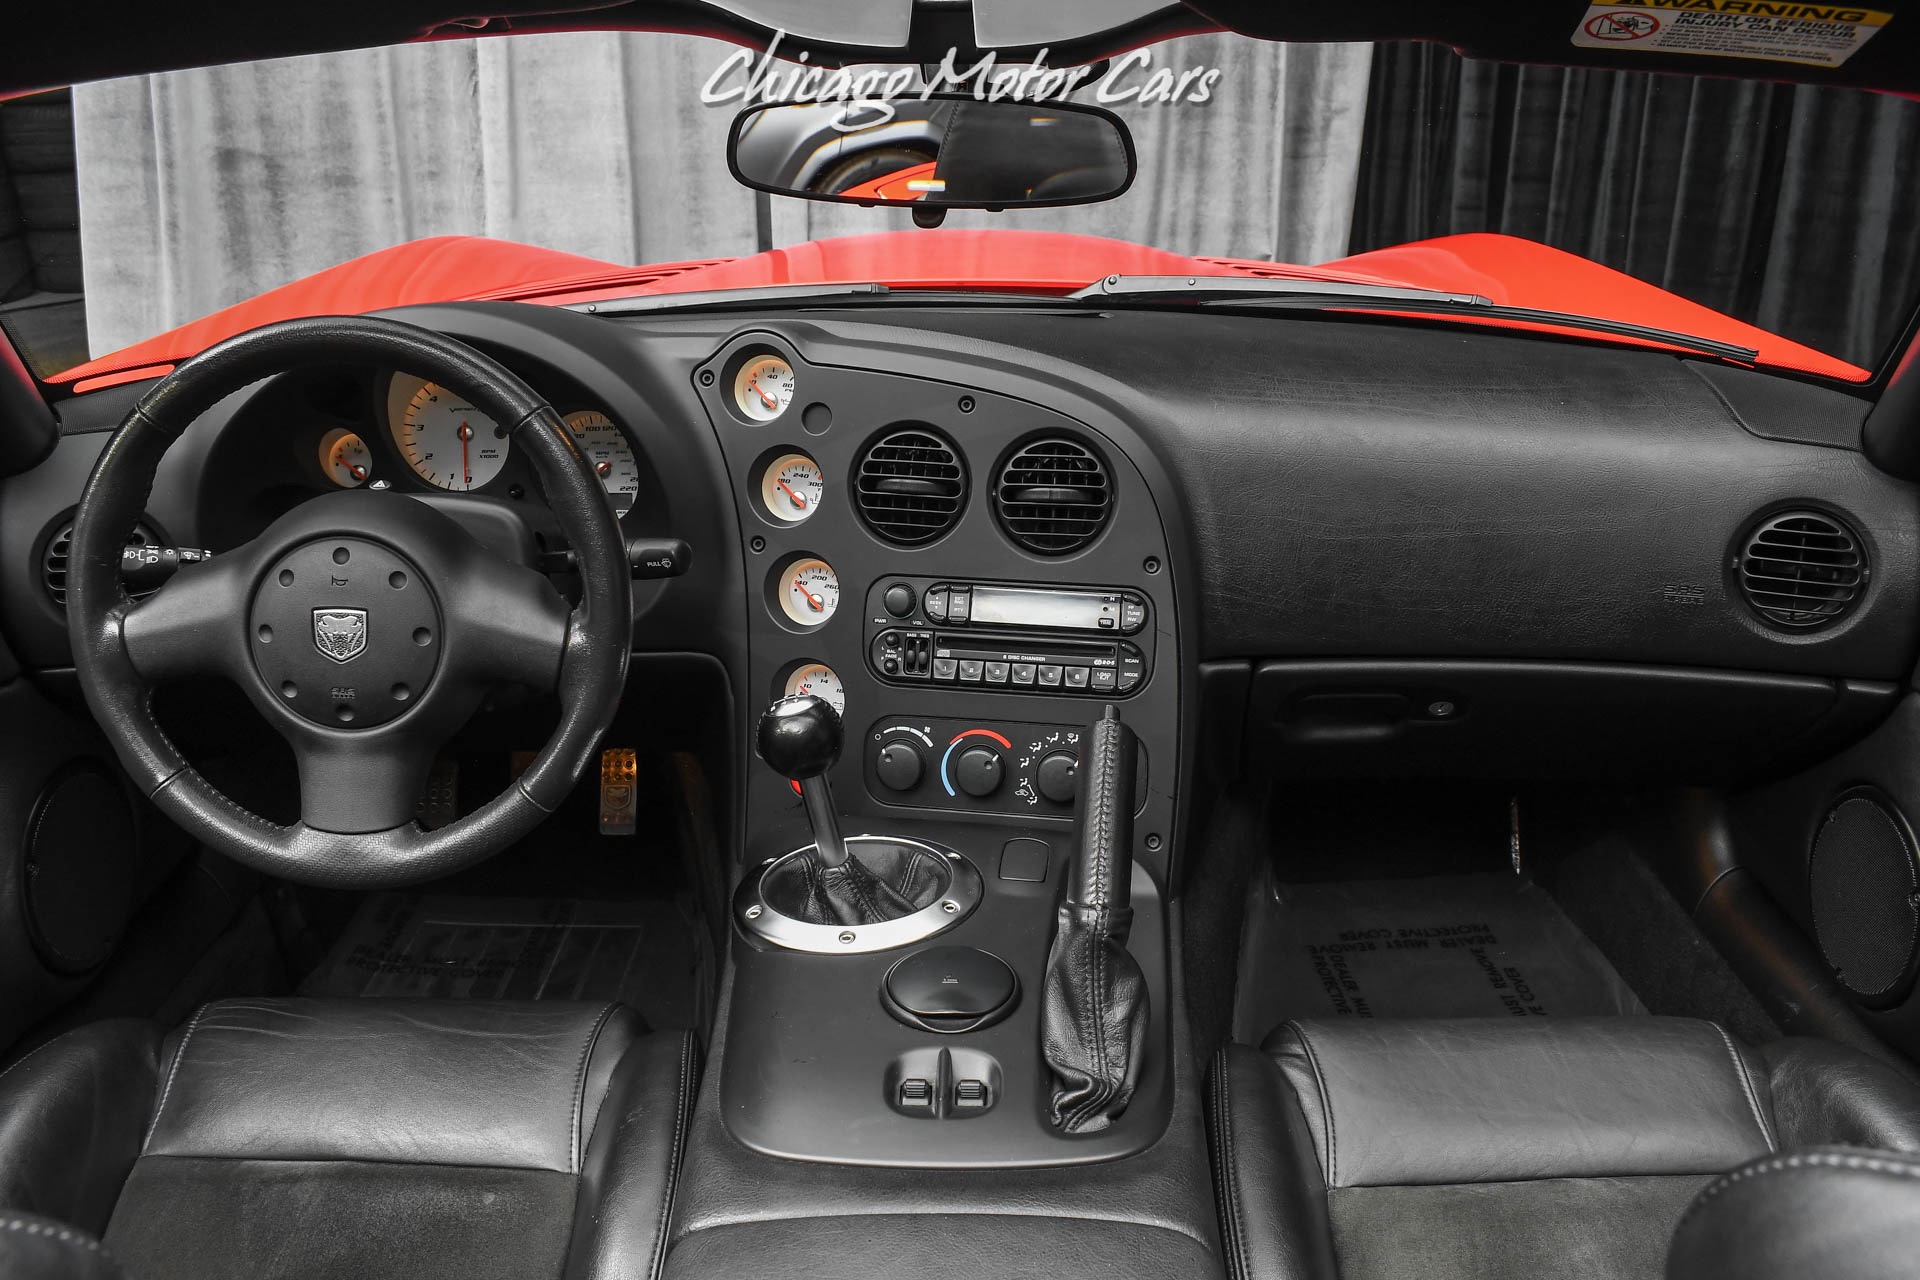 Used 2003 Dodge Viper SRT-10 Convertible ONLY 19K Miles! HOT Color!  Serviced! Incredible Example! For Sale ($59,800) | Chicago Motor Cars Stock  #19418